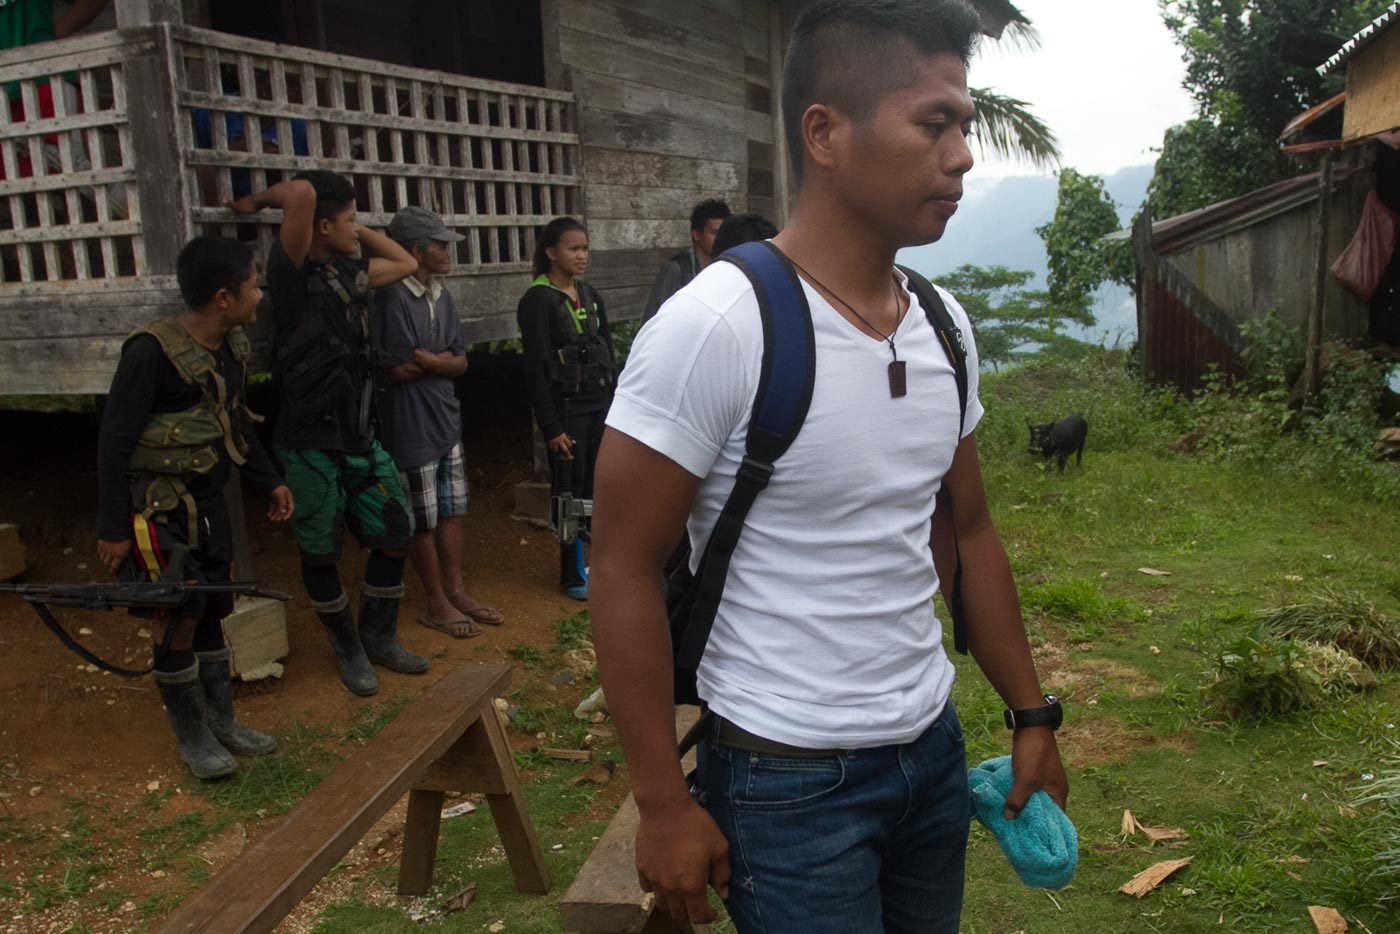 FREE. PO1 Alfredo Basabica Jr walks to his freedom after being released by the NPA in Barangay Binondo, Baganga, Davao Oriental on July 28, 2017.  